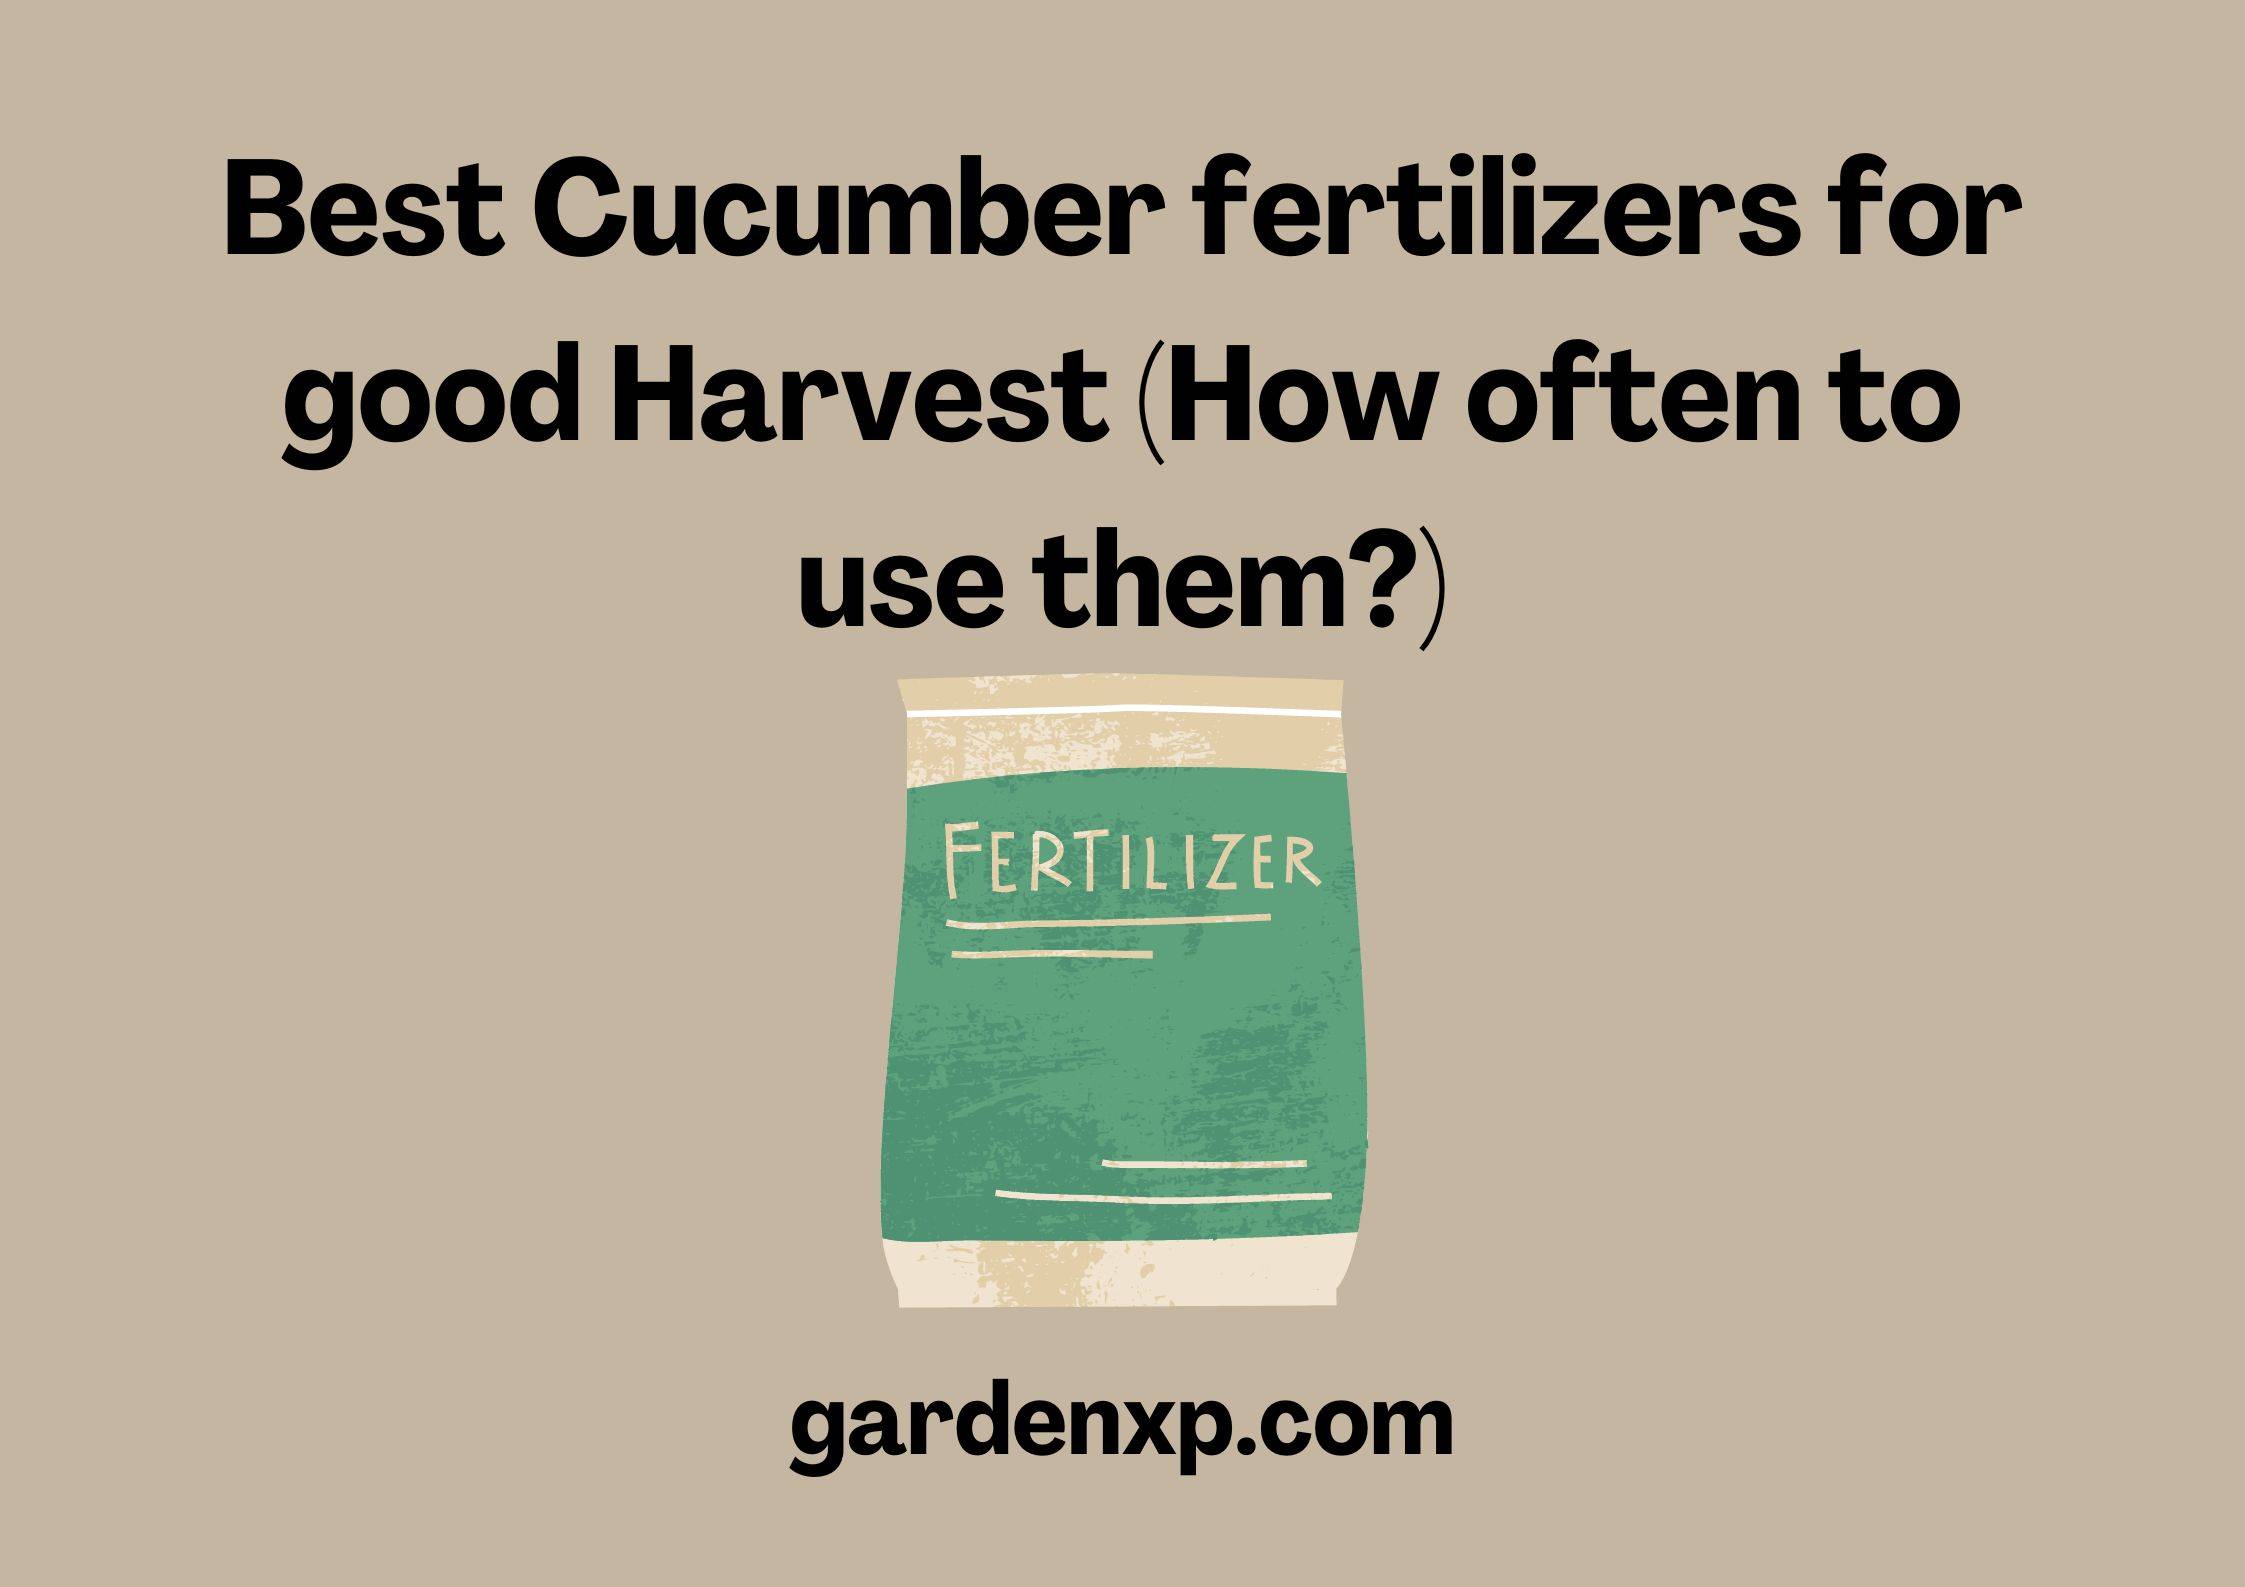 Best Cucumber fertilizers for good Harvest (How often to use them?)